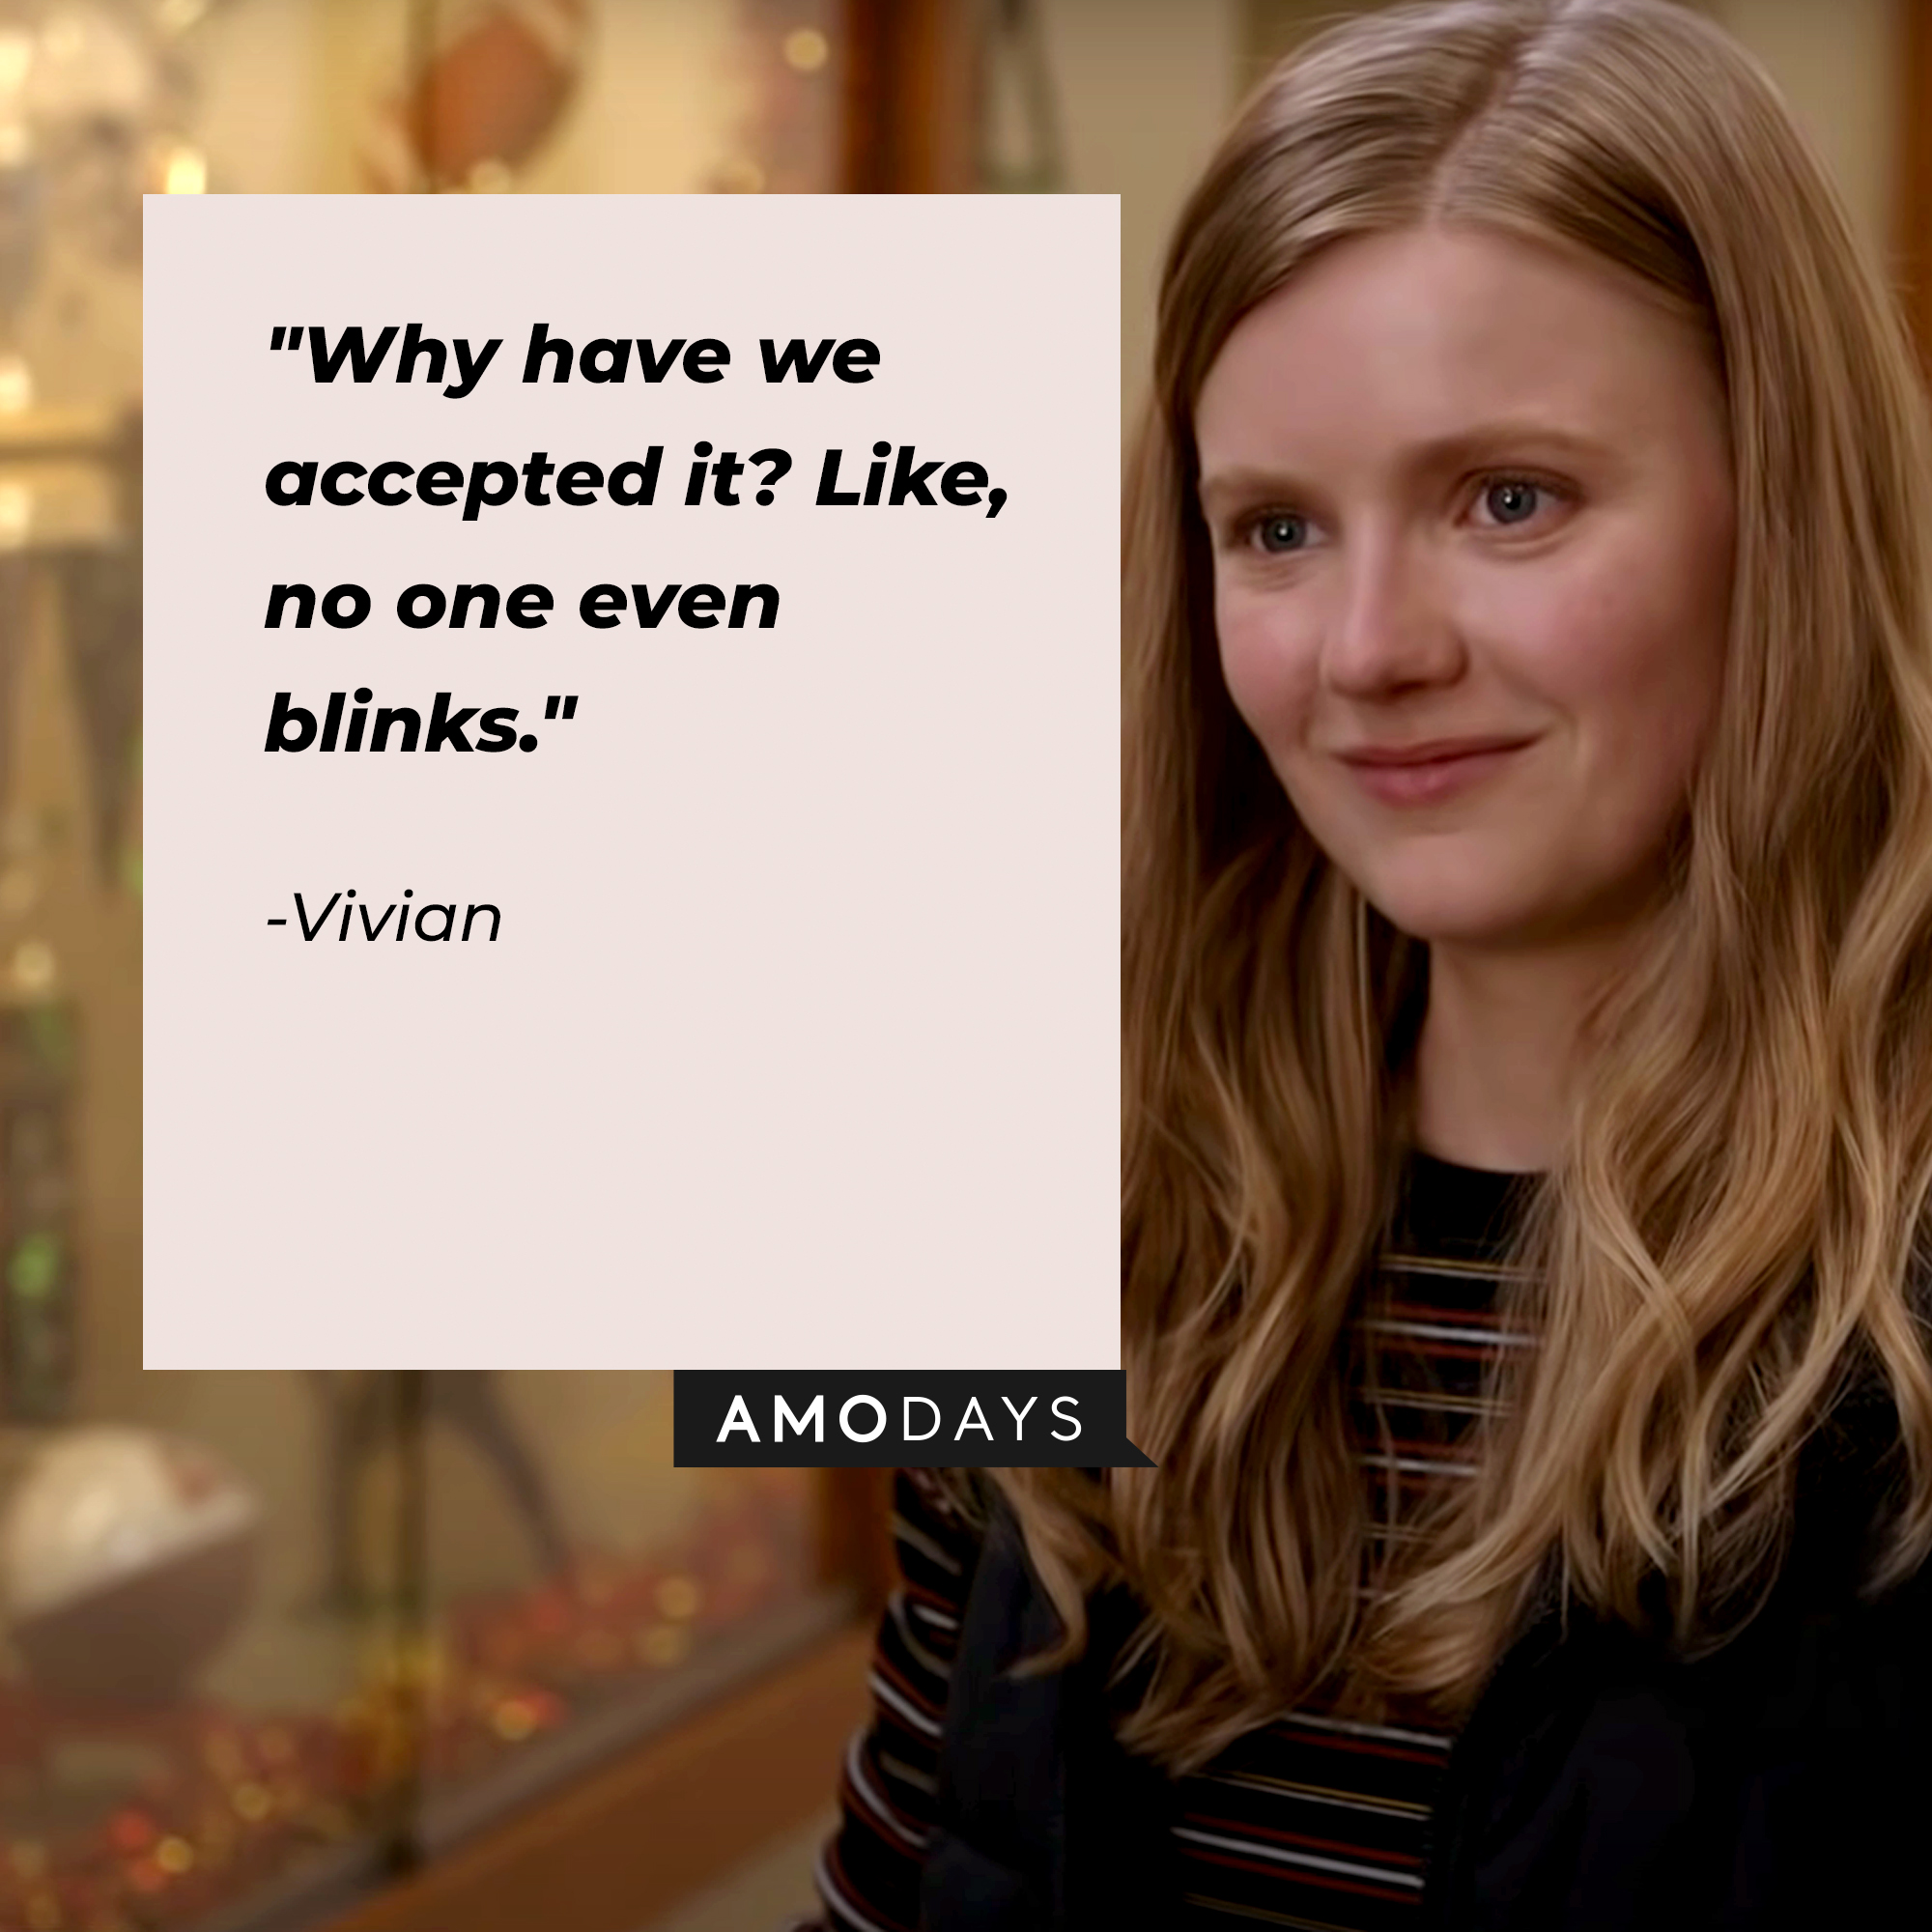 Vivian’s quote: "Why have we accepted it? Like, no one even blinks." | Image: Youtube.com/Netflix